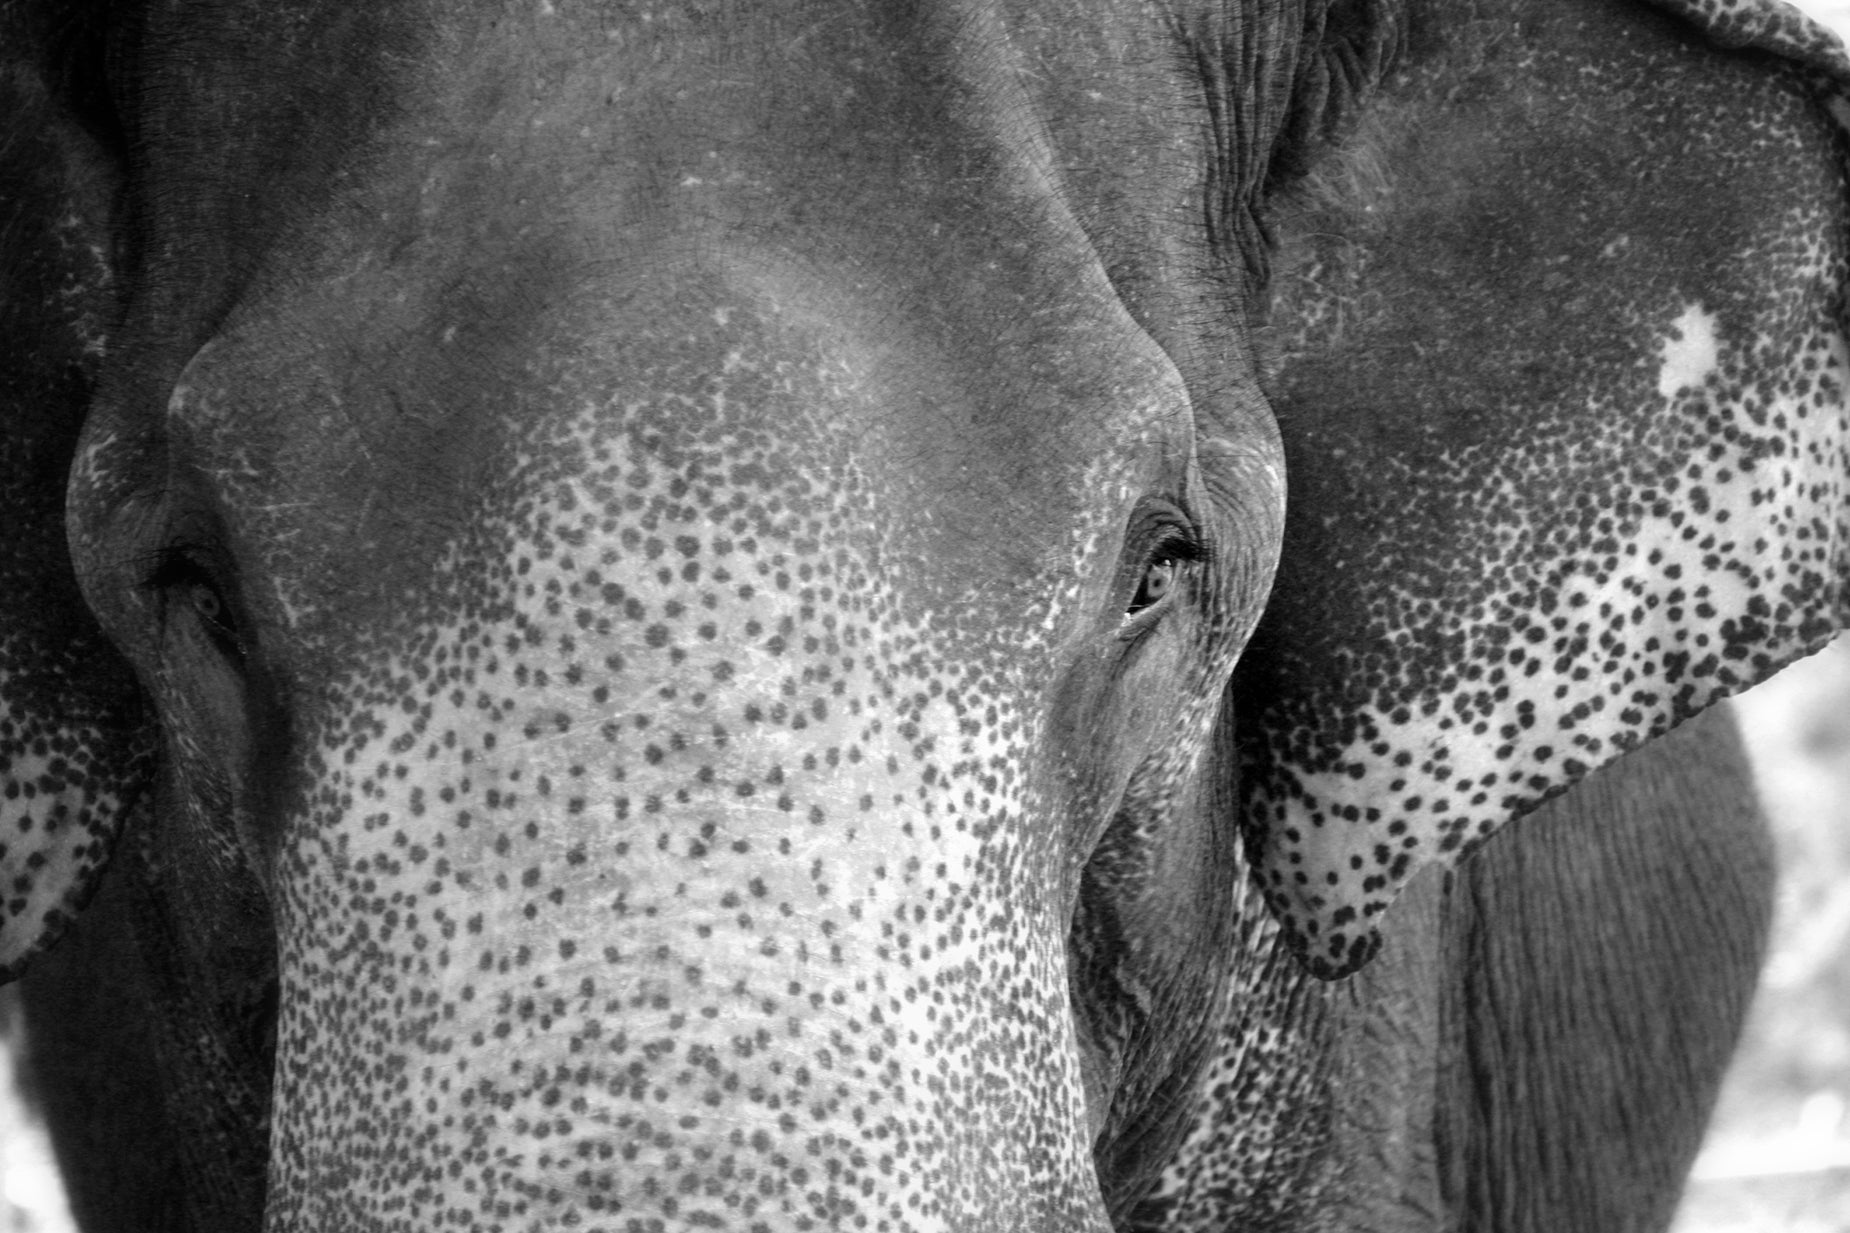 close up po of an elephant showing spots of paint on its skin